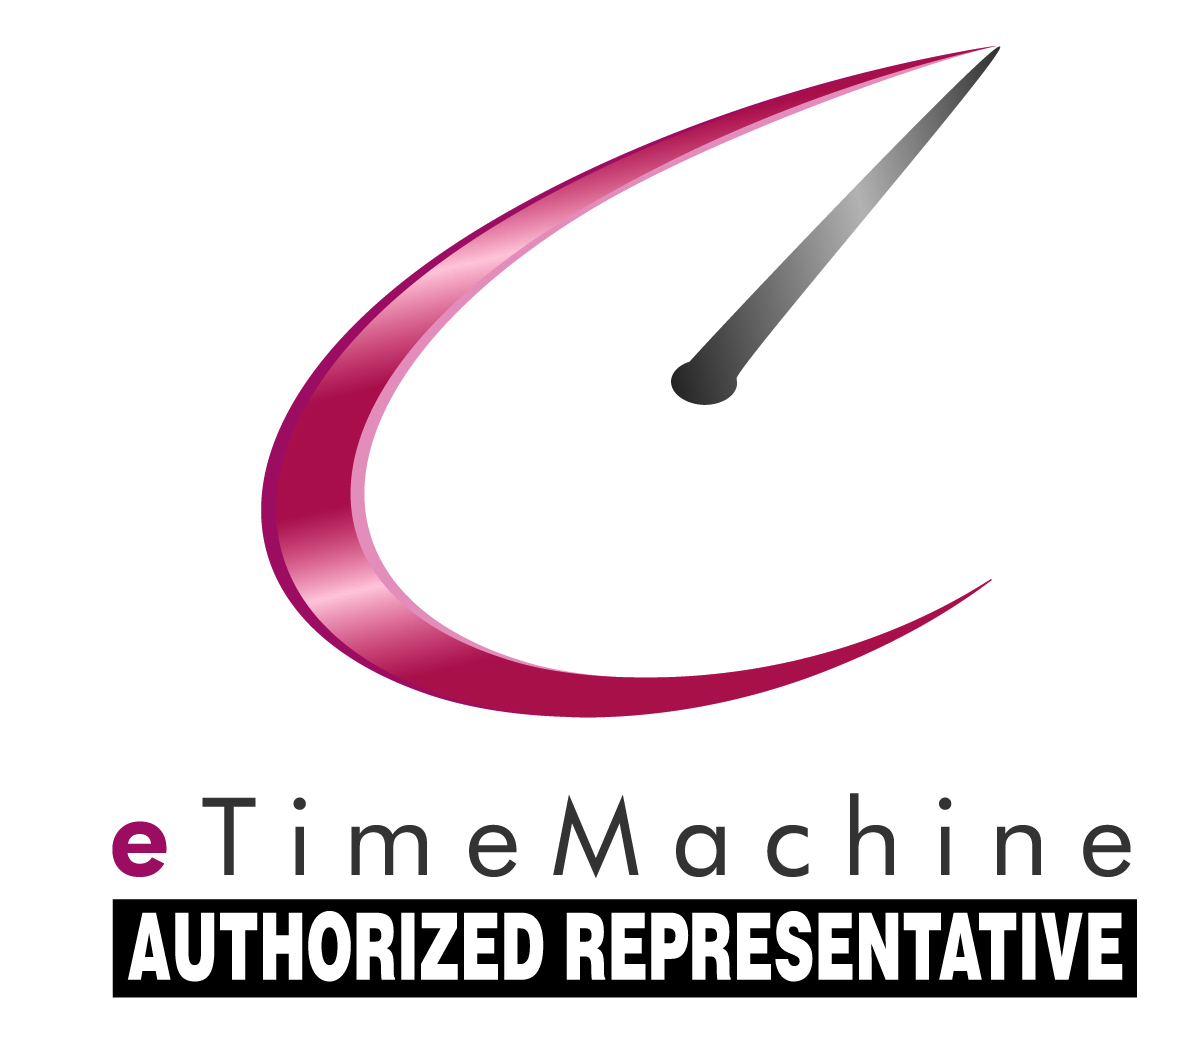 CDP is an eTineMachine Authorized Representative, providing timesheet management solutions in the mid-Atlantic region.